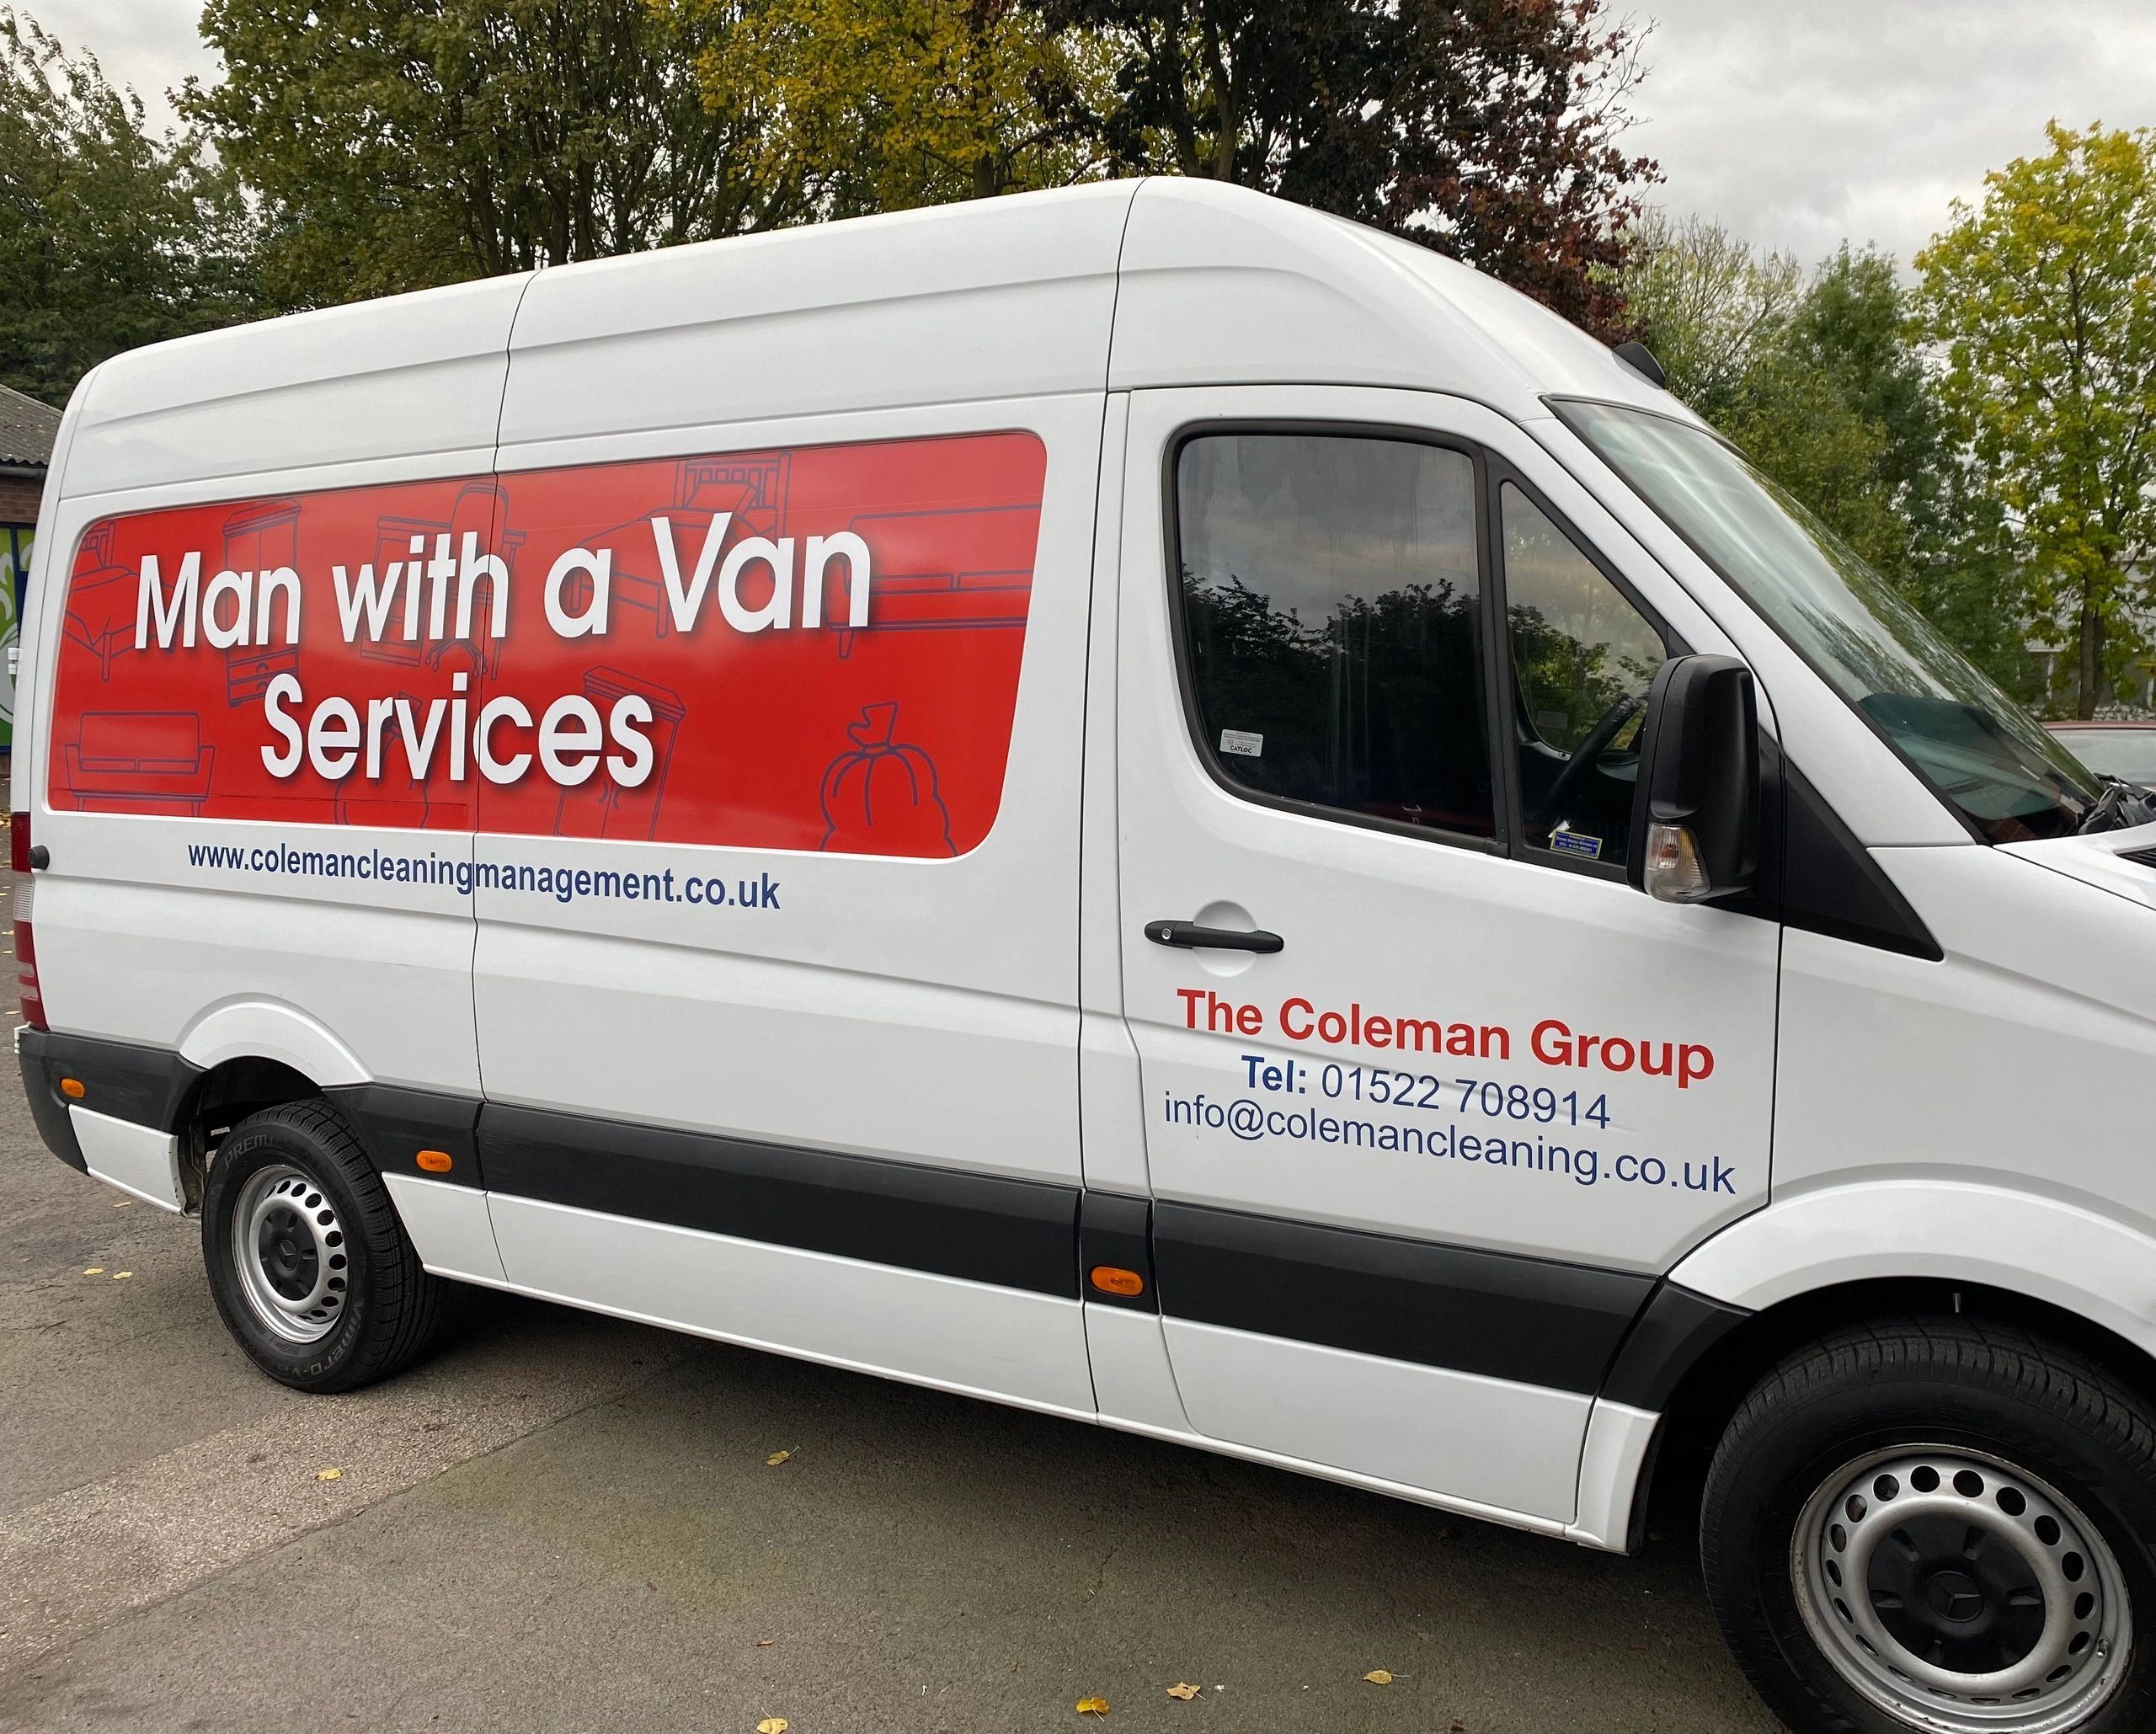 Lincoln man with a van service in Lincoln, Lincolnshire.